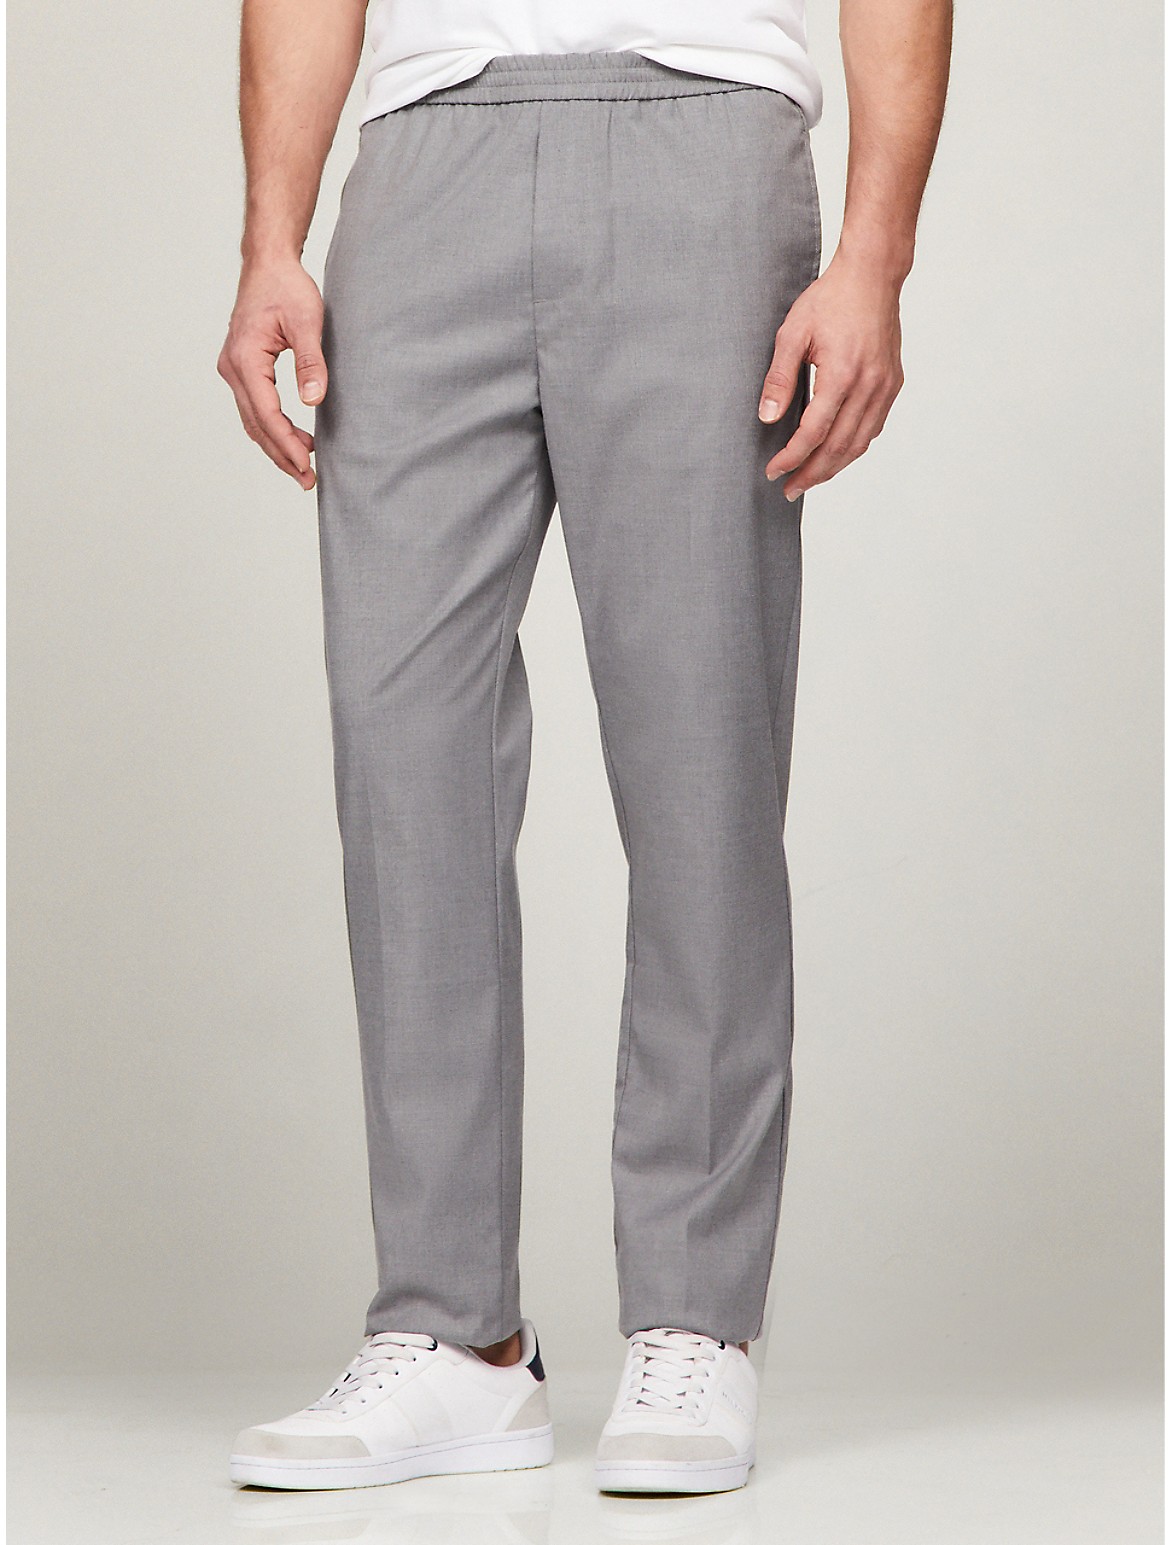 Tommy Hilfiger Regular Fit Solid Stretch Pant In Mid Grey Heather